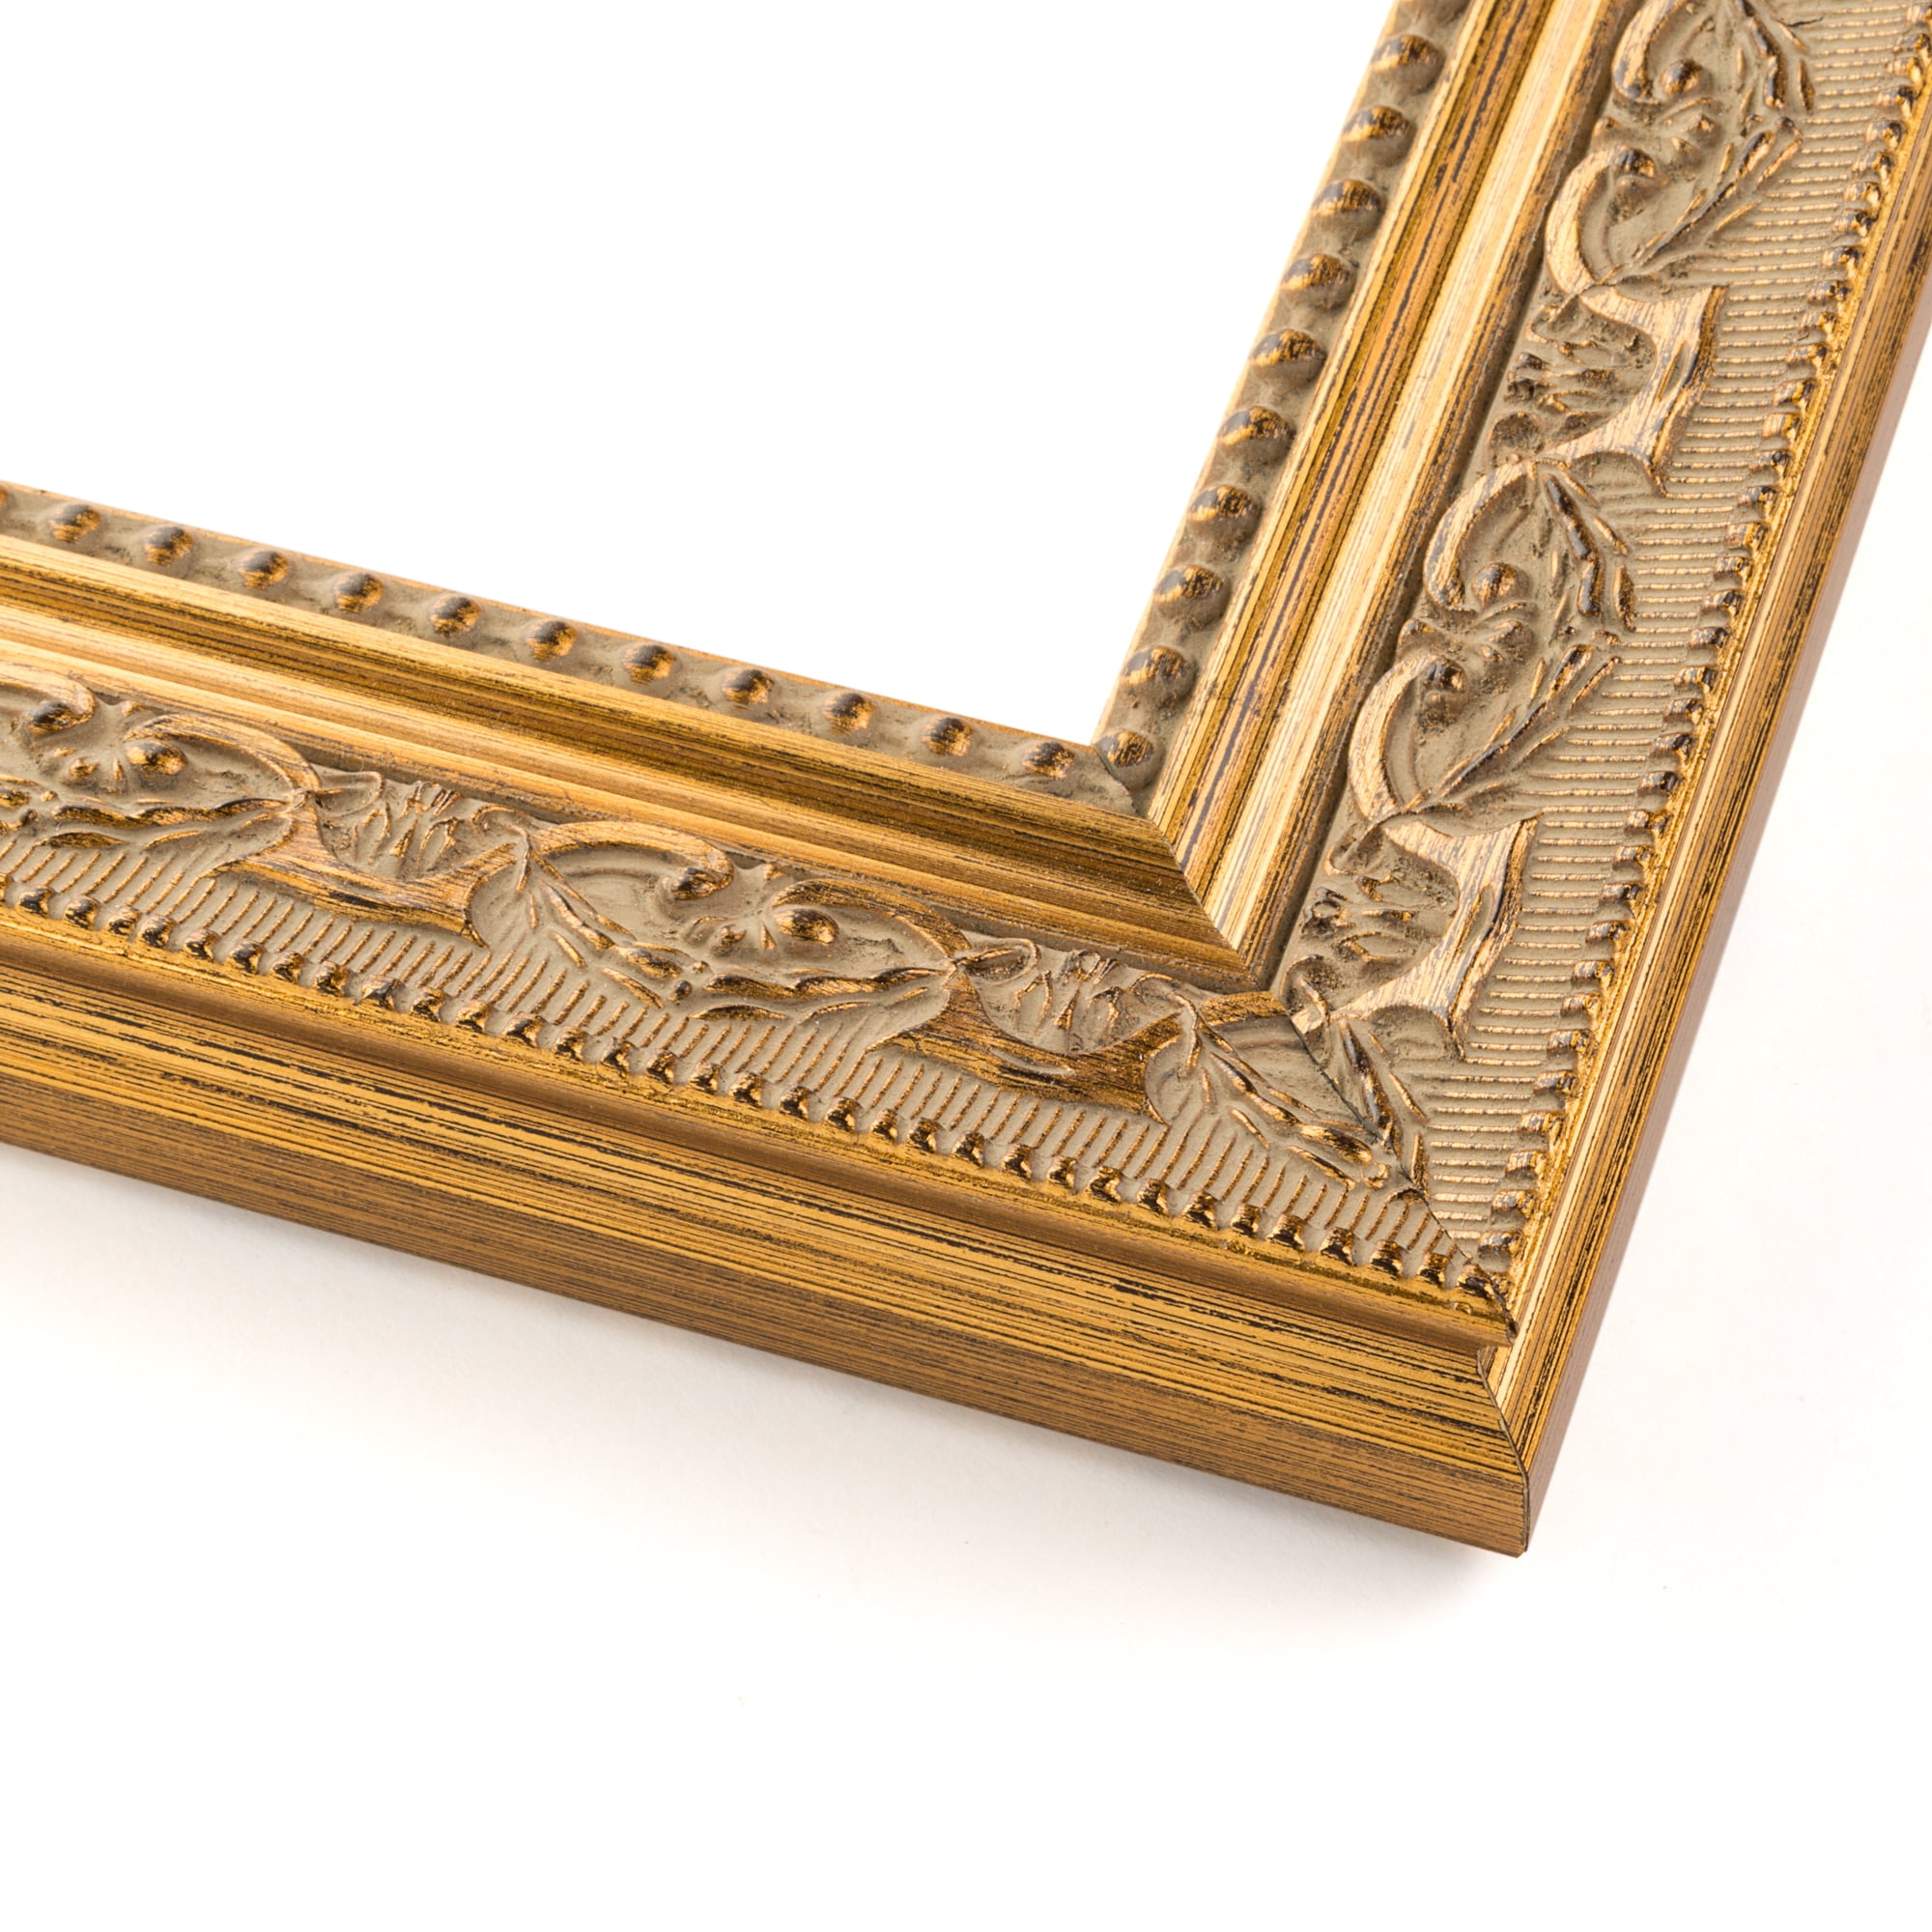 24x10 Distressed/Aged Antique Silver Complete Wood Picture Frame with UV Acrylic, Foam Board Backing, & Hardware